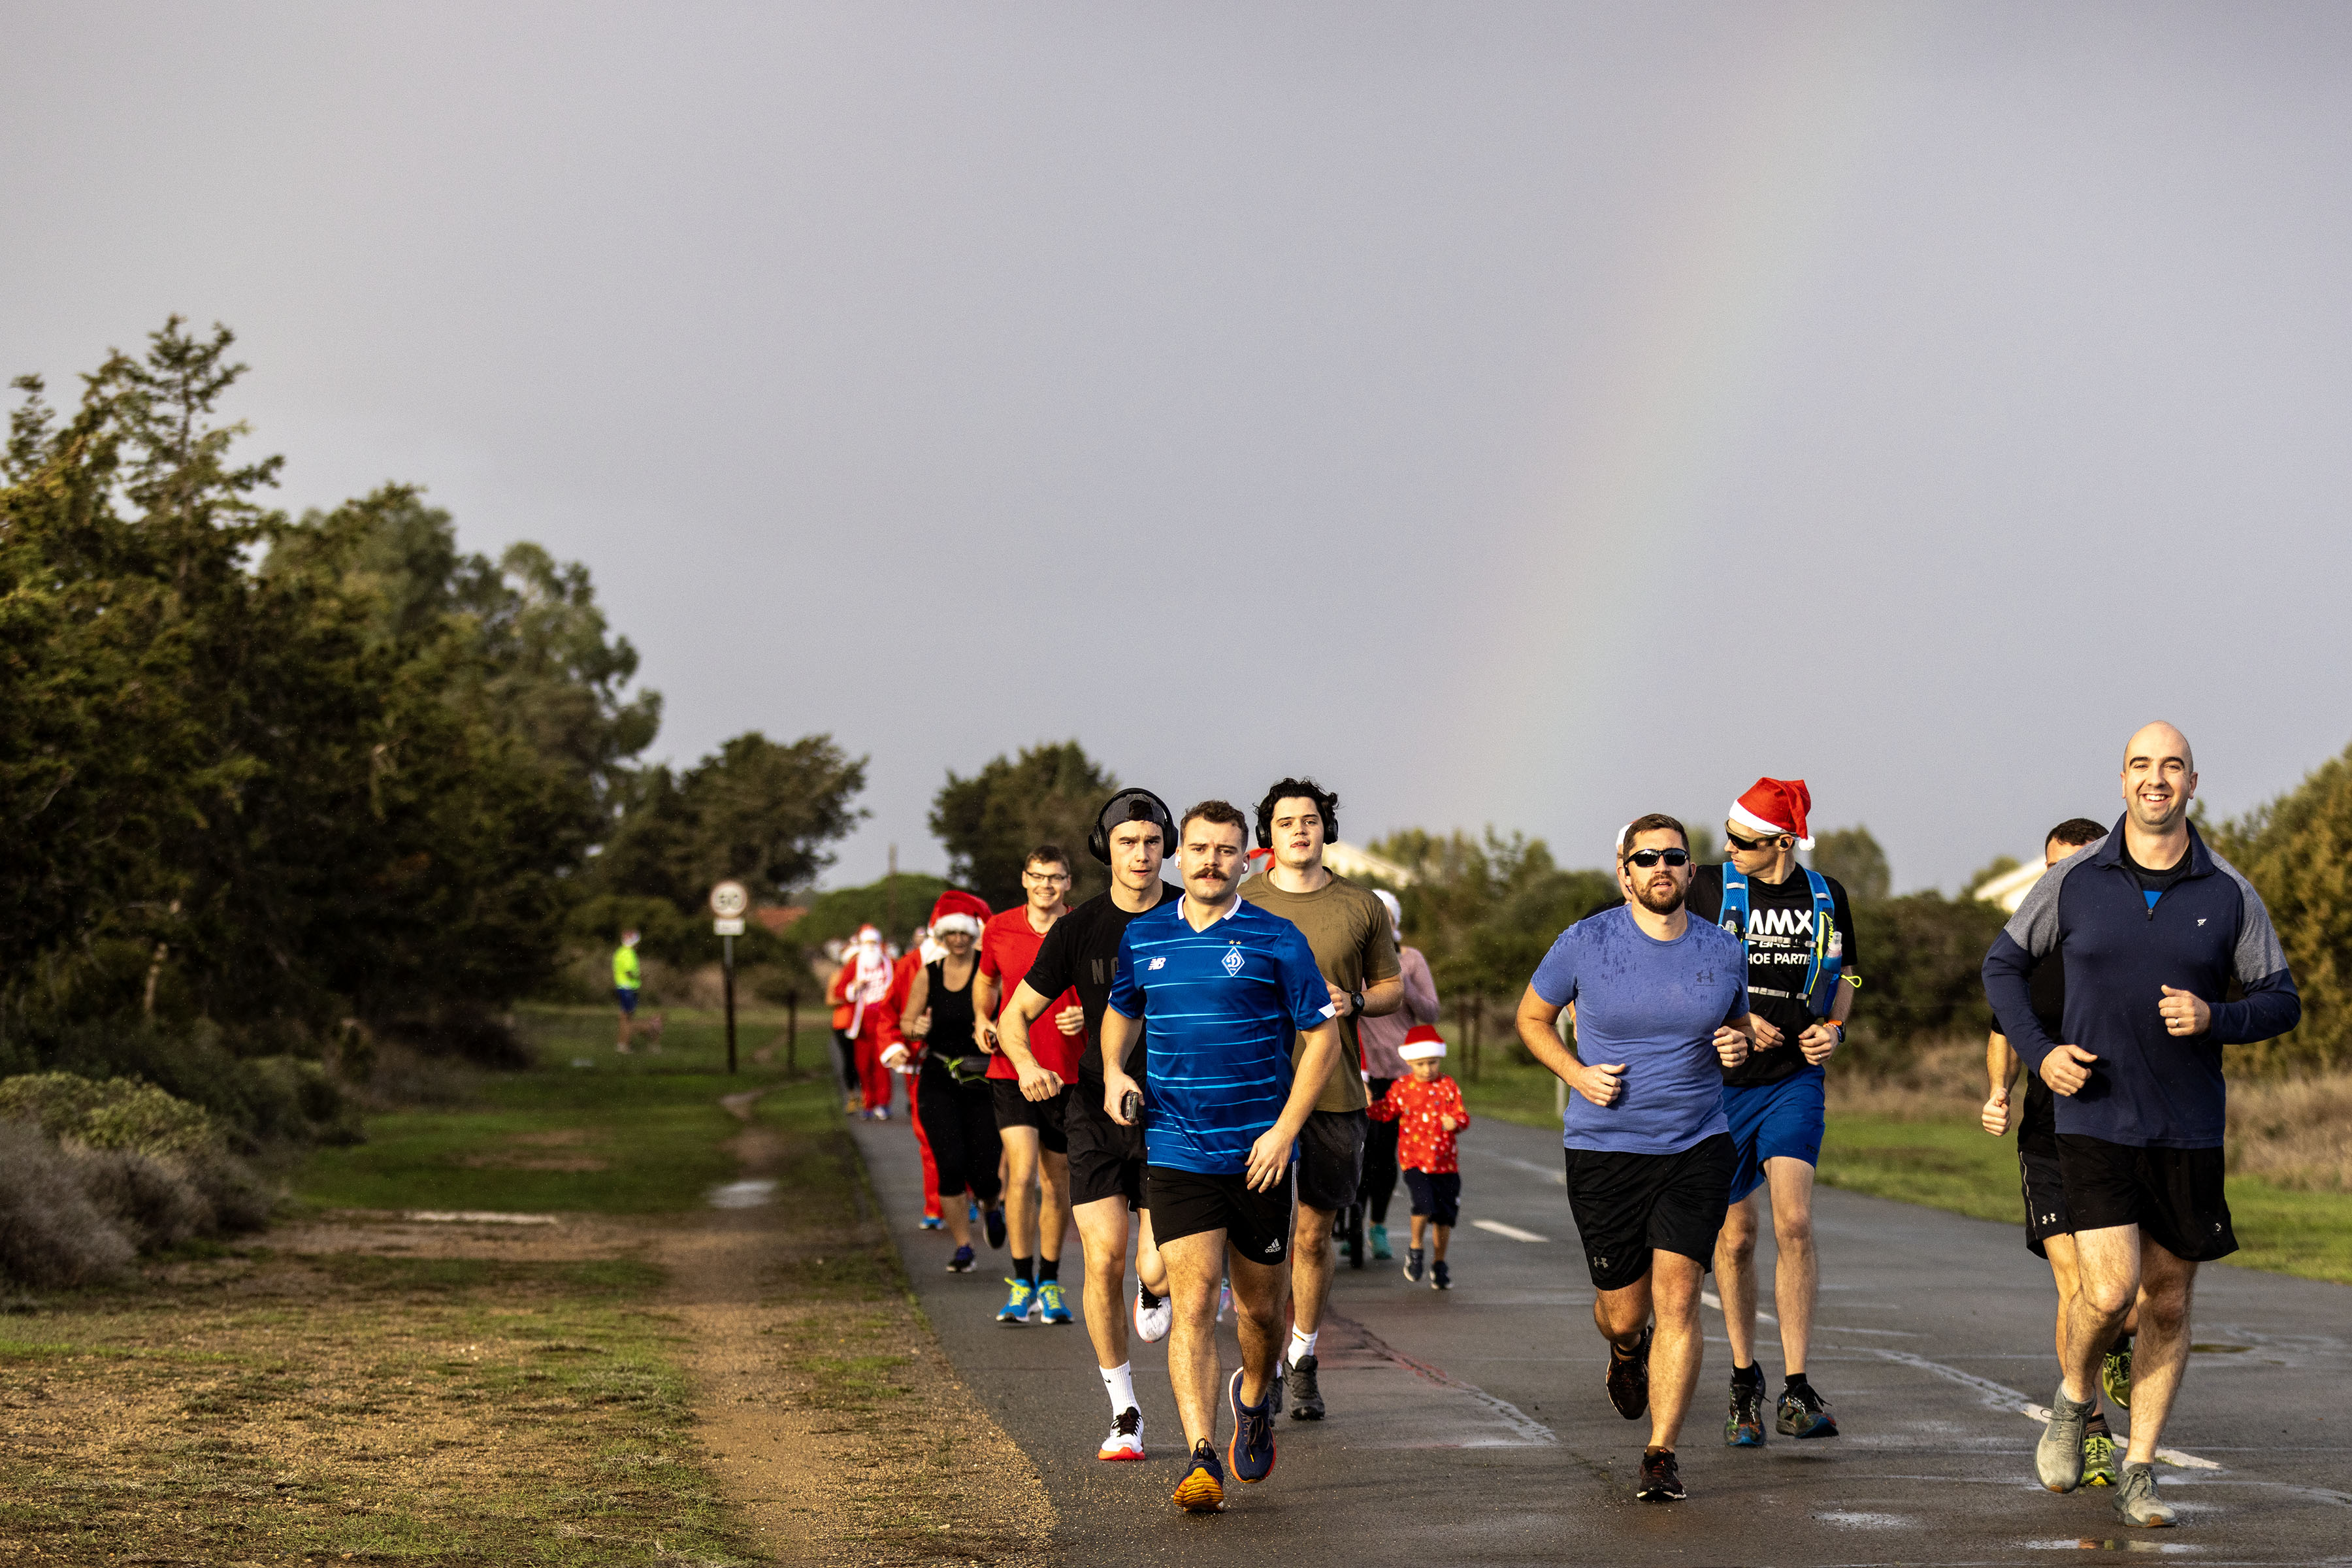 Group of people running down a road as part of the fun run, with a rainbow in the background.